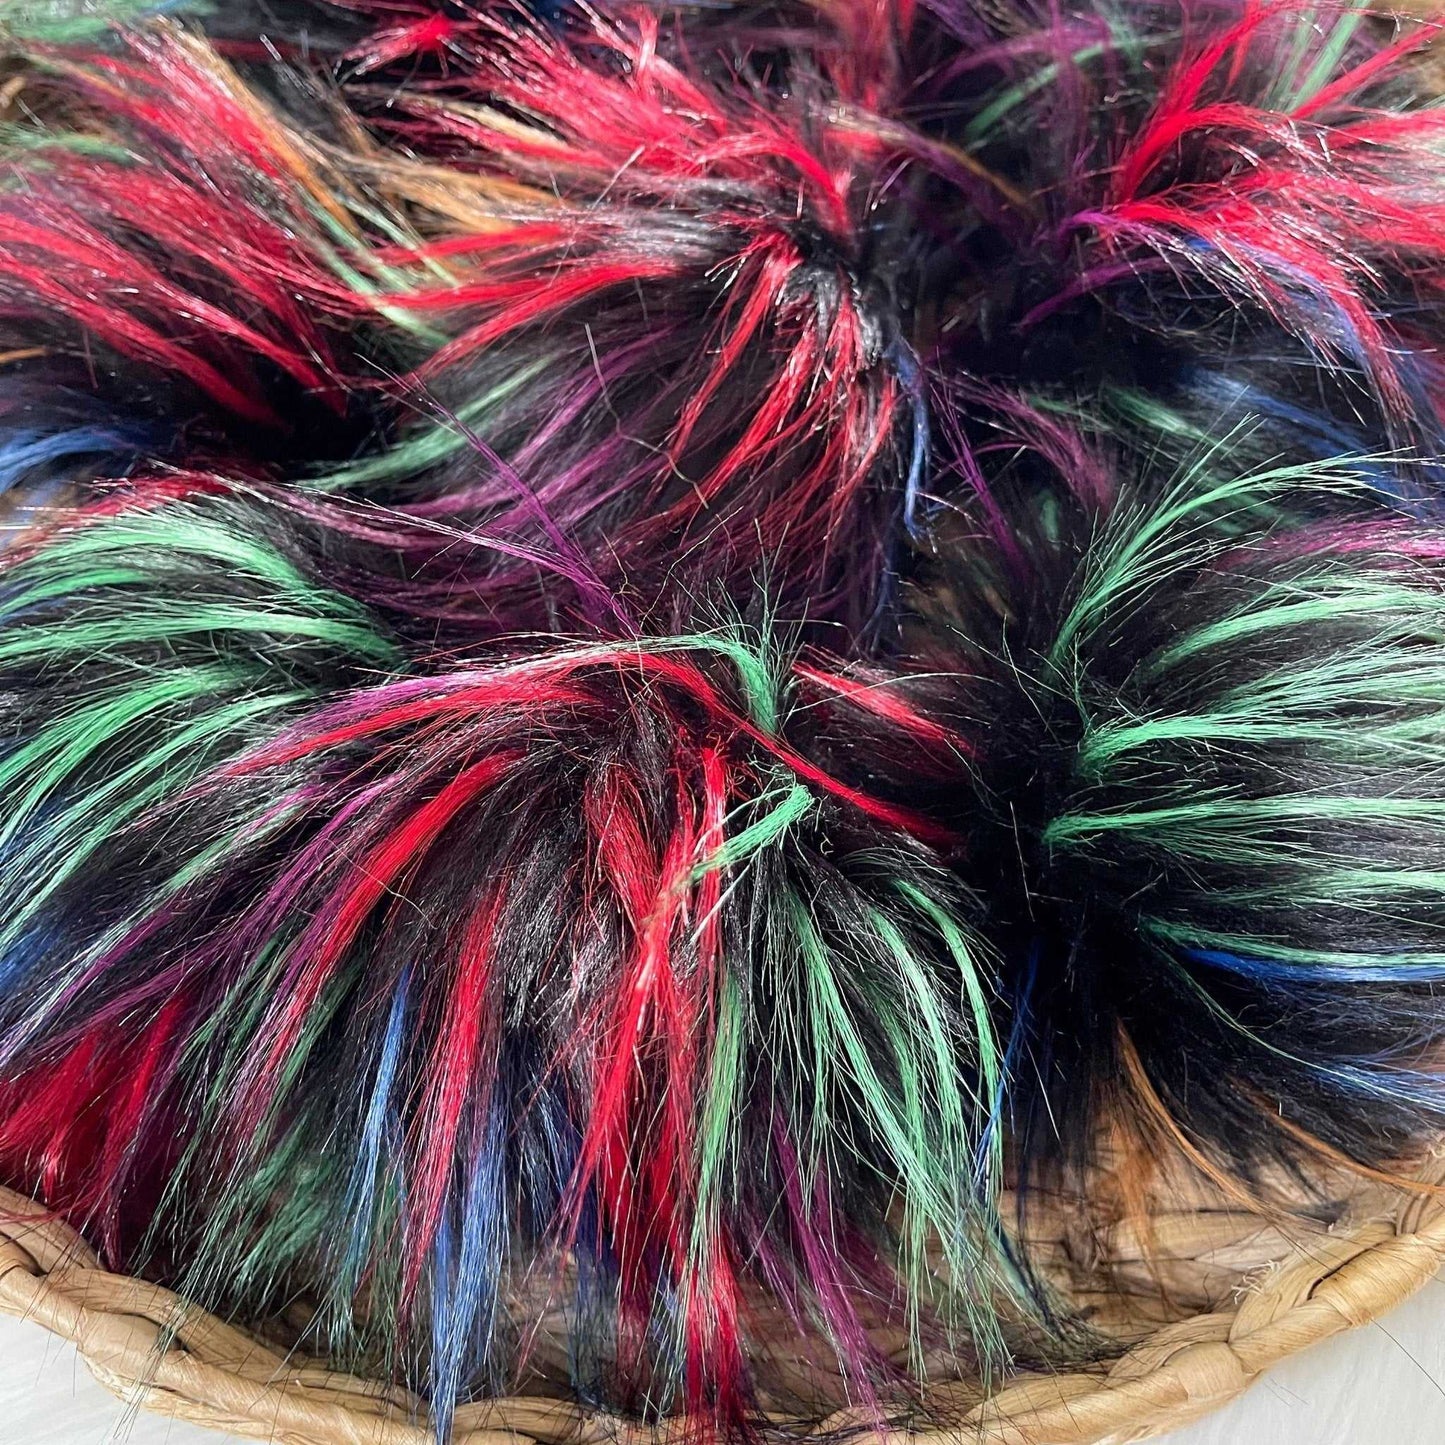 Northern Lights Faux Fur Fabric by the Yard or Meter | Rainbow Pompom, Arts & Crafts, Decor, Costume Faux Fur Fabric 3 $ Buttons & Beans Co.